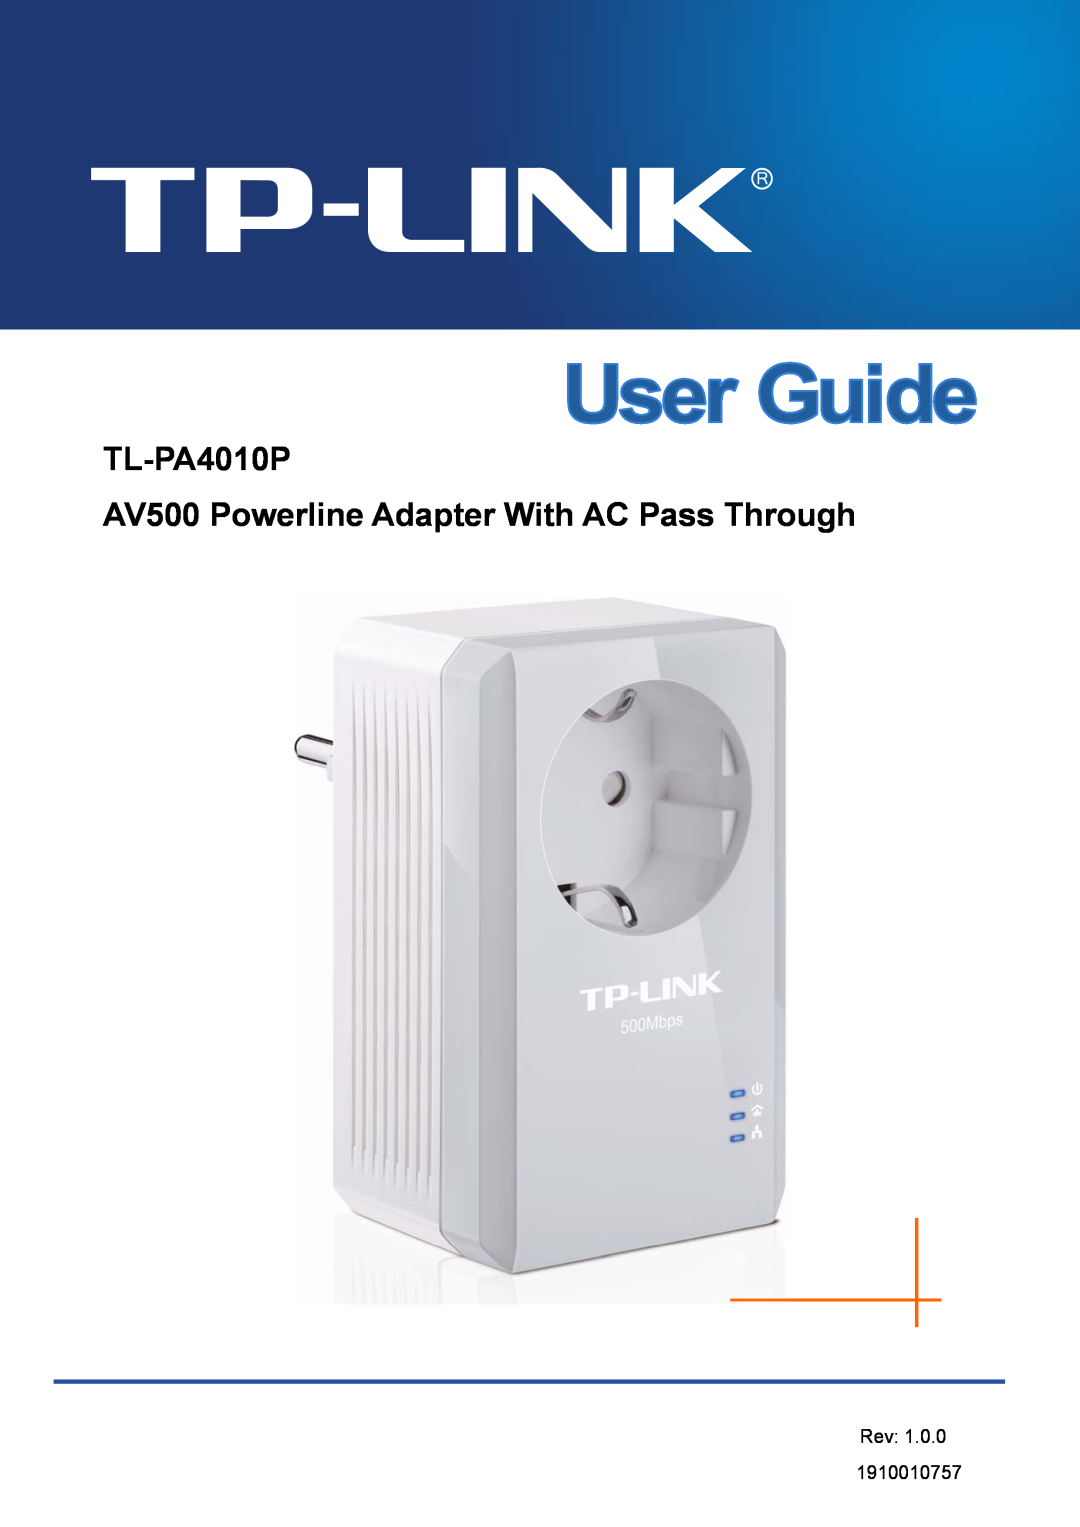 TP-Link manual TL-PA4010P AV500 Powerline Adapter With AC Pass Through, Rev 1.0.0 